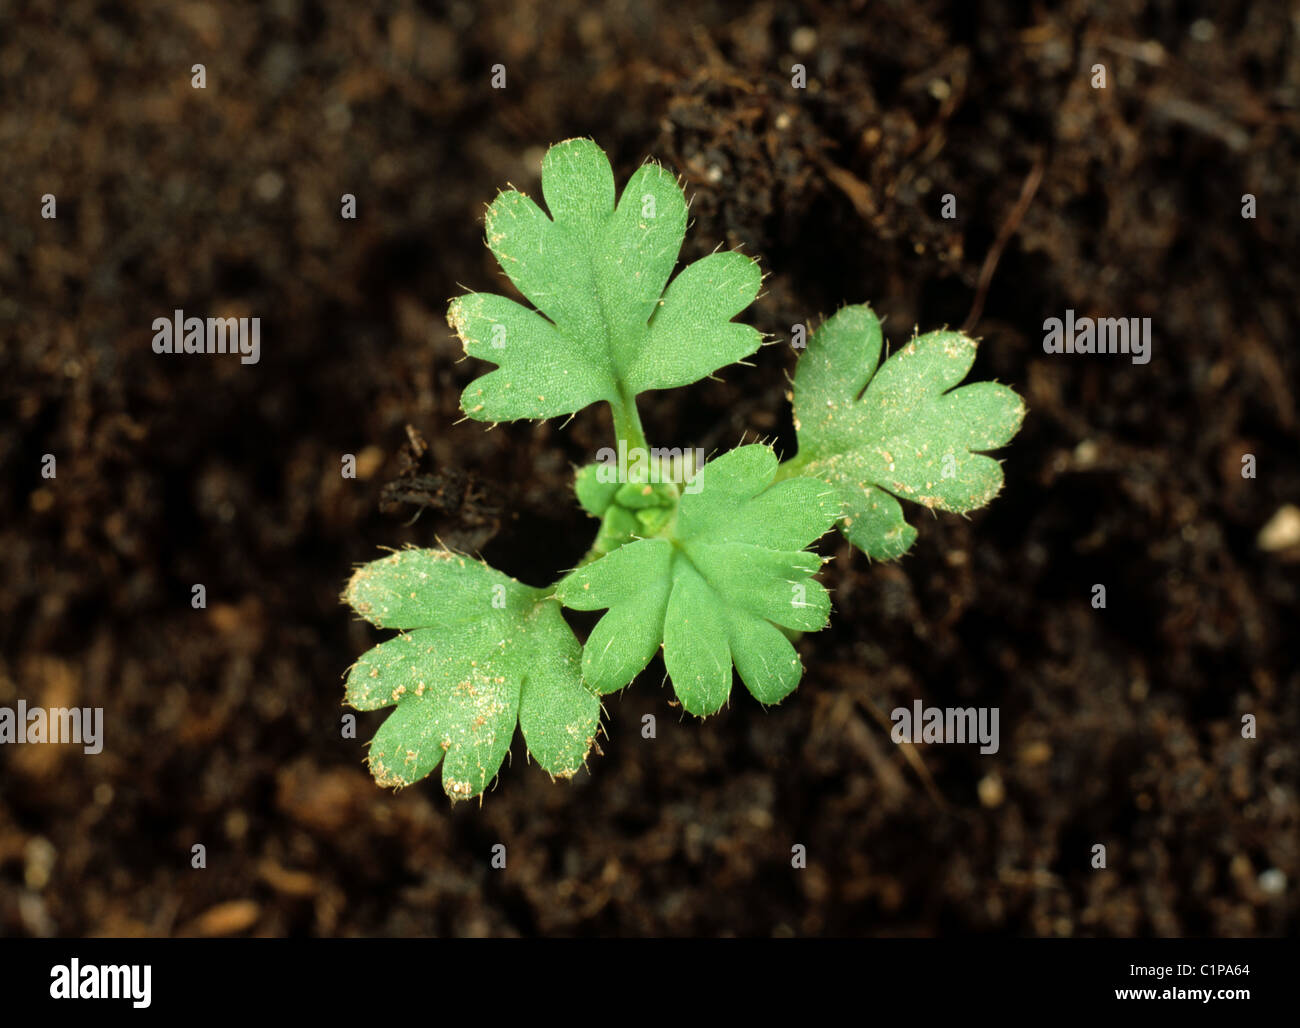 Parsley piert (Aphanes arvensis) young seedling plant Stock Photo